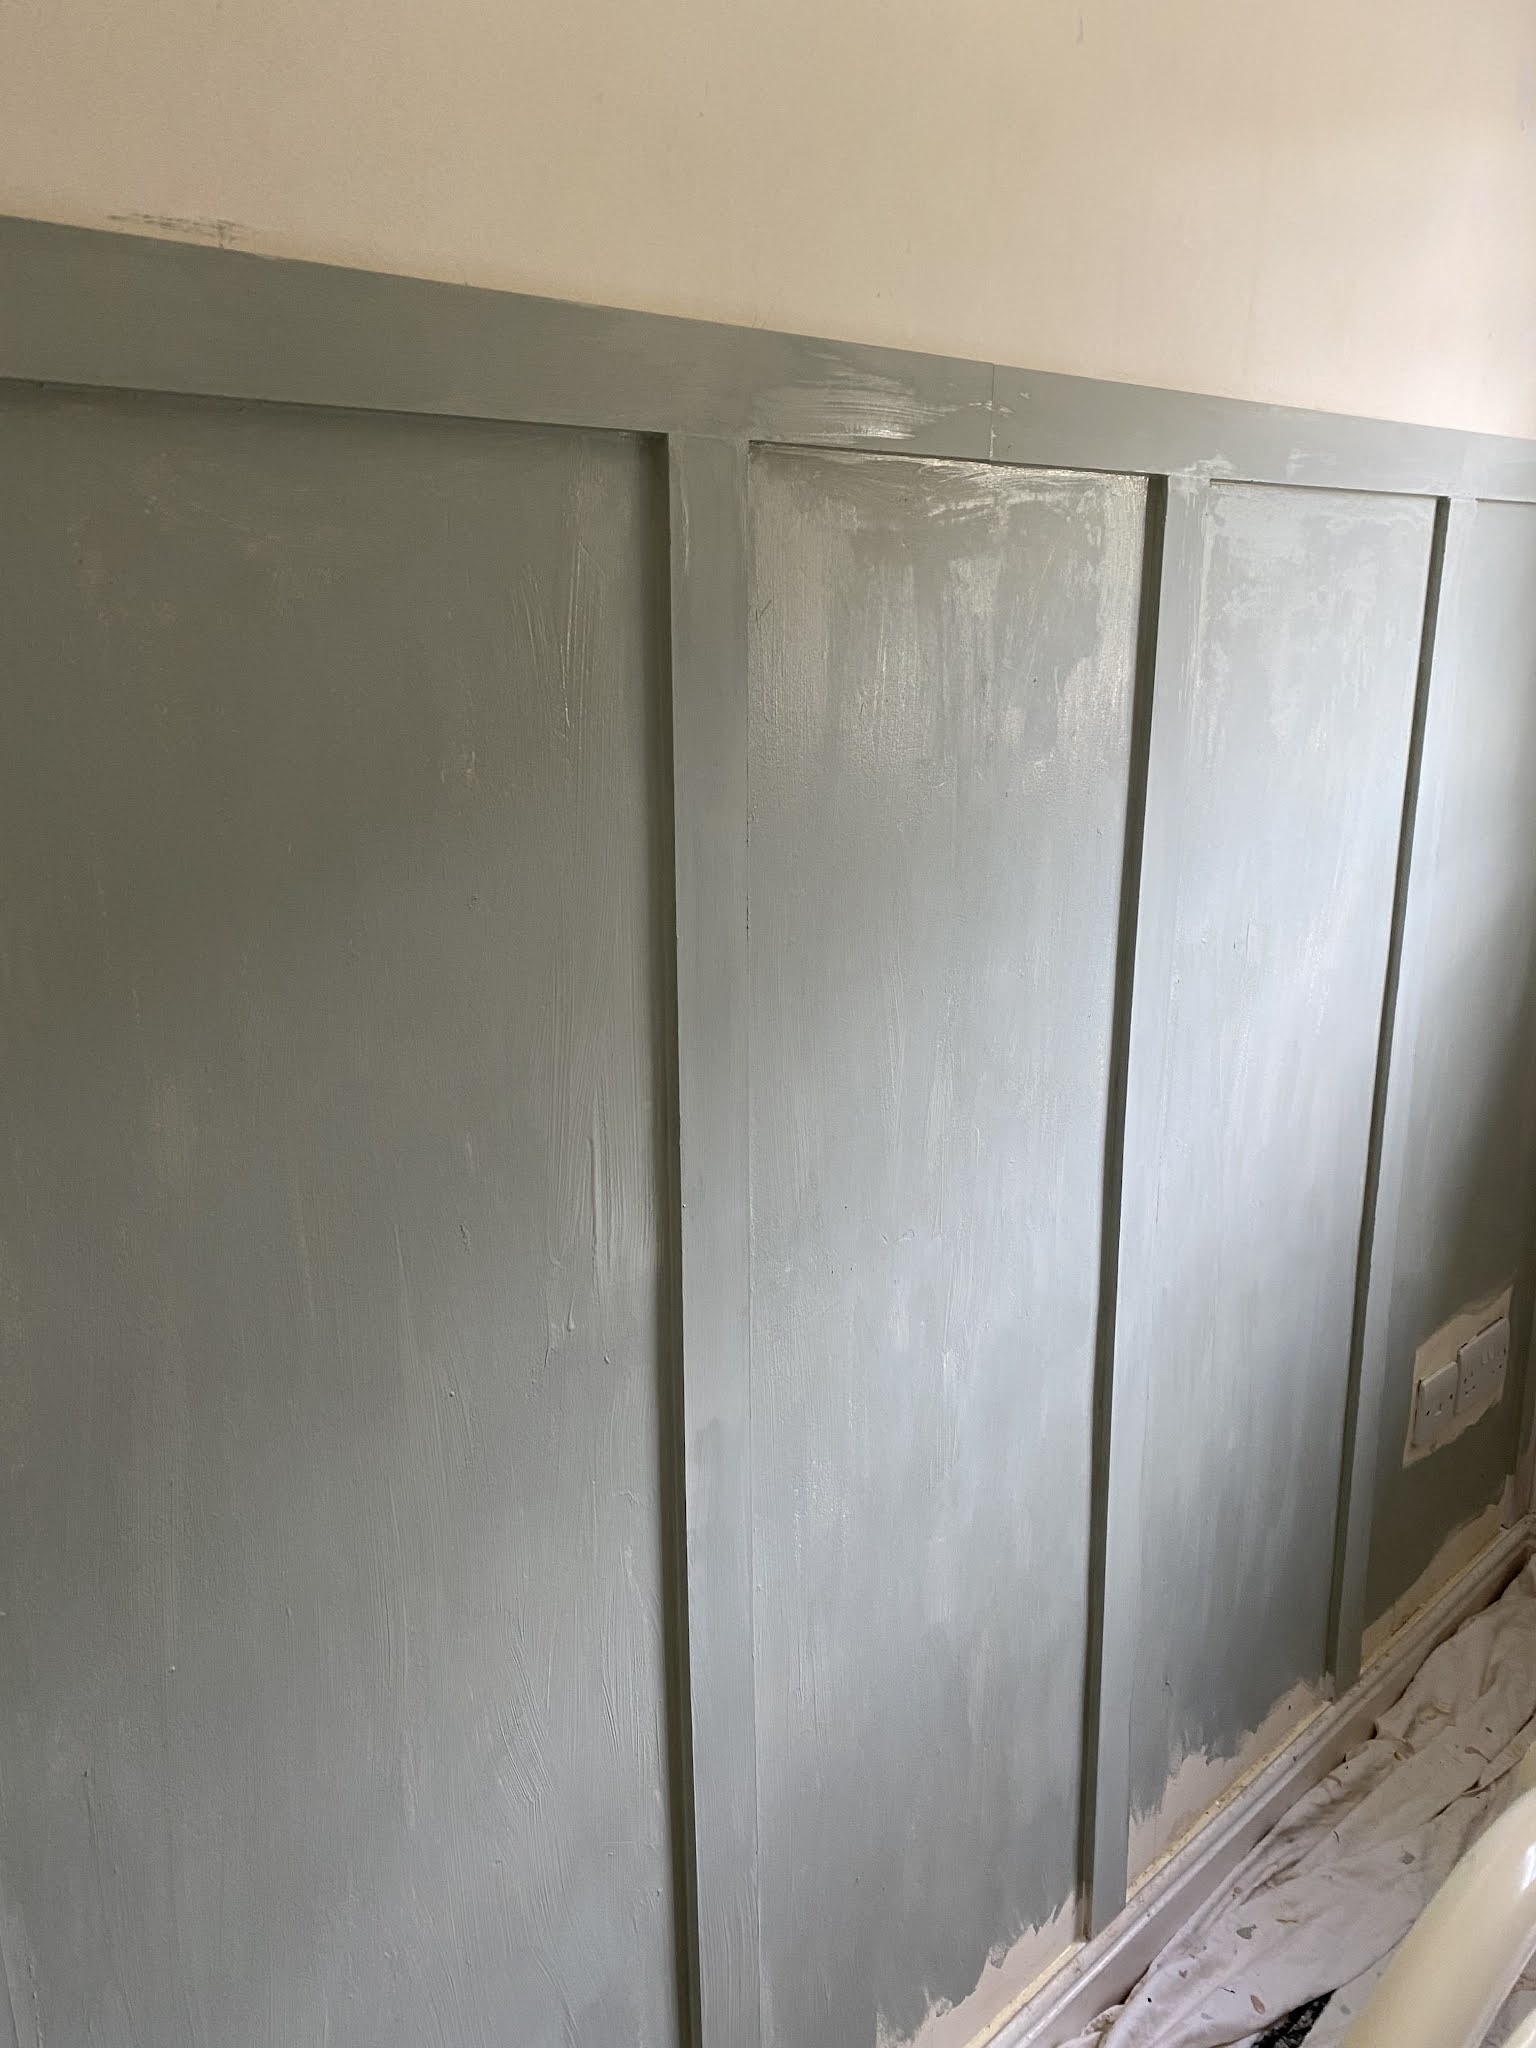 How to add wall panelling to a room and transform a space. Full DIY tutorial on how to panel a wall on a tight budget.